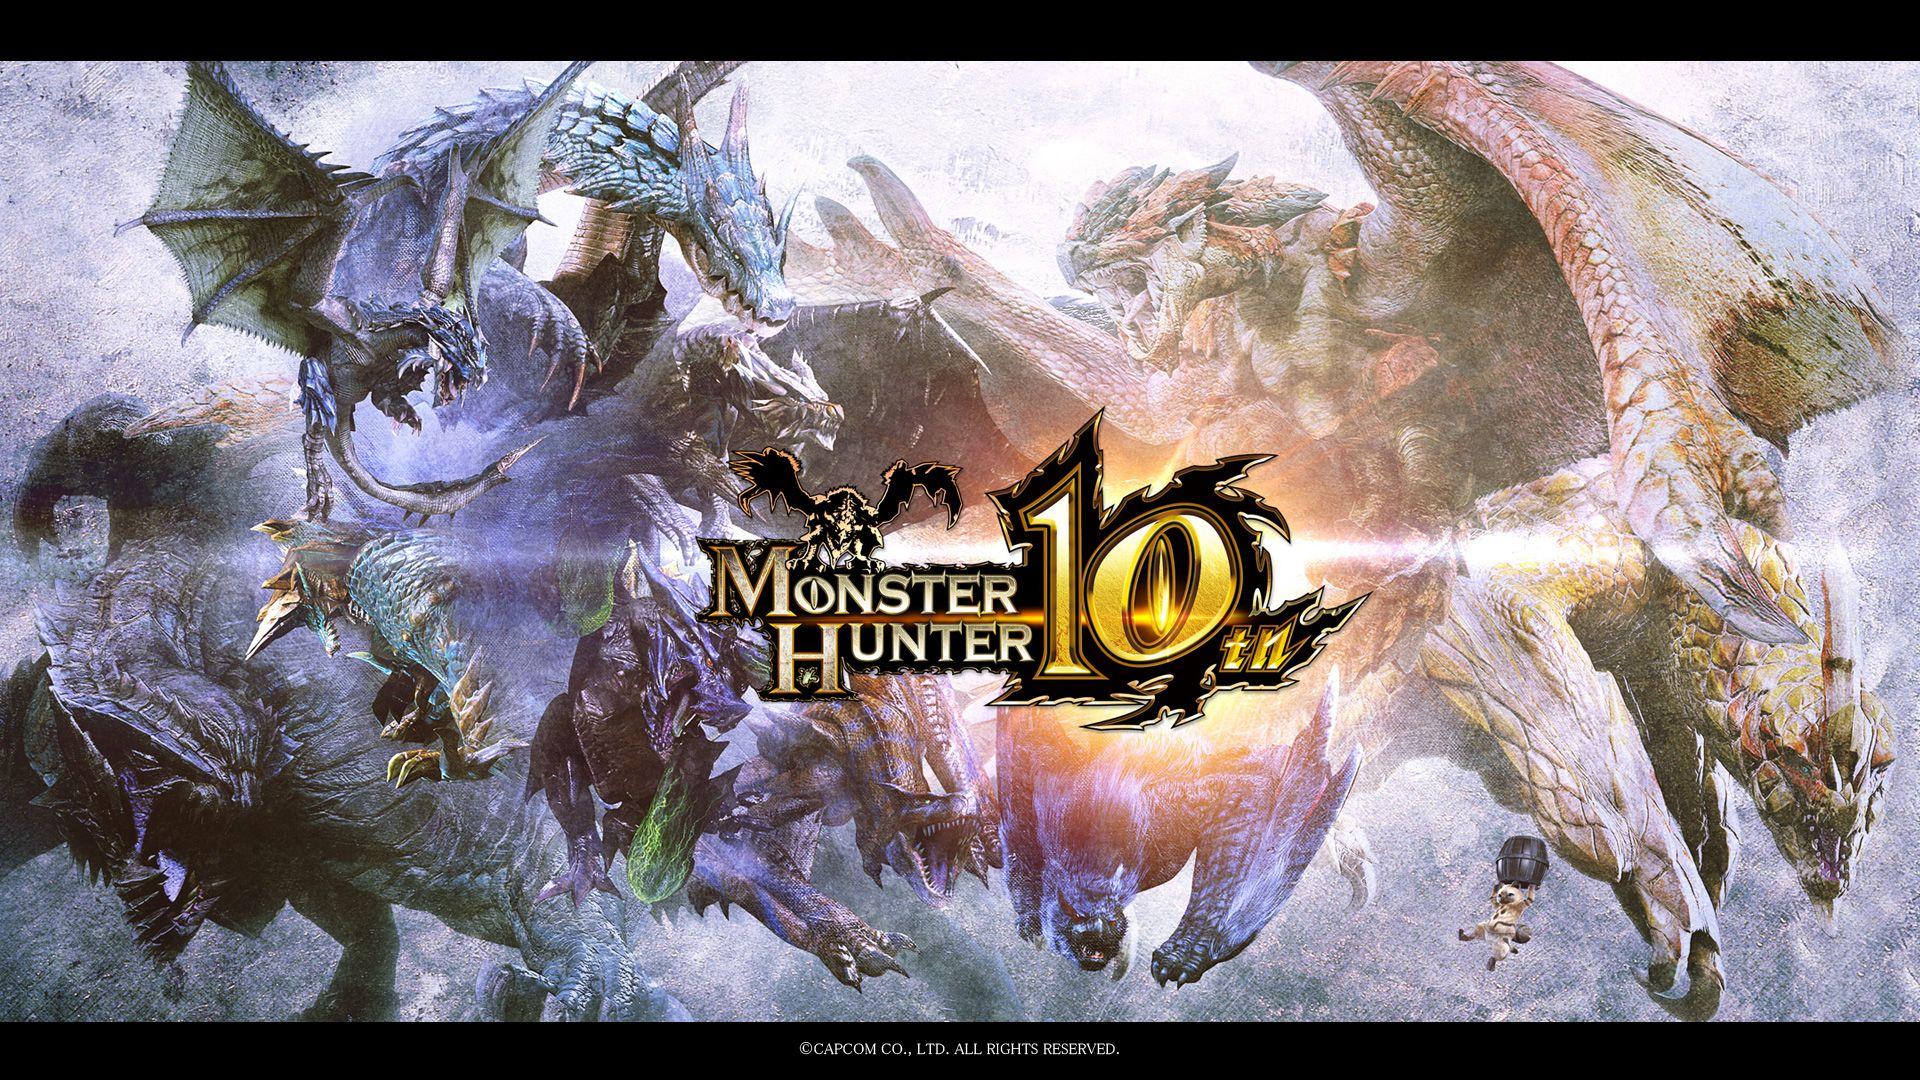 MH 10th Anniversary Official Wallpaper. Monster